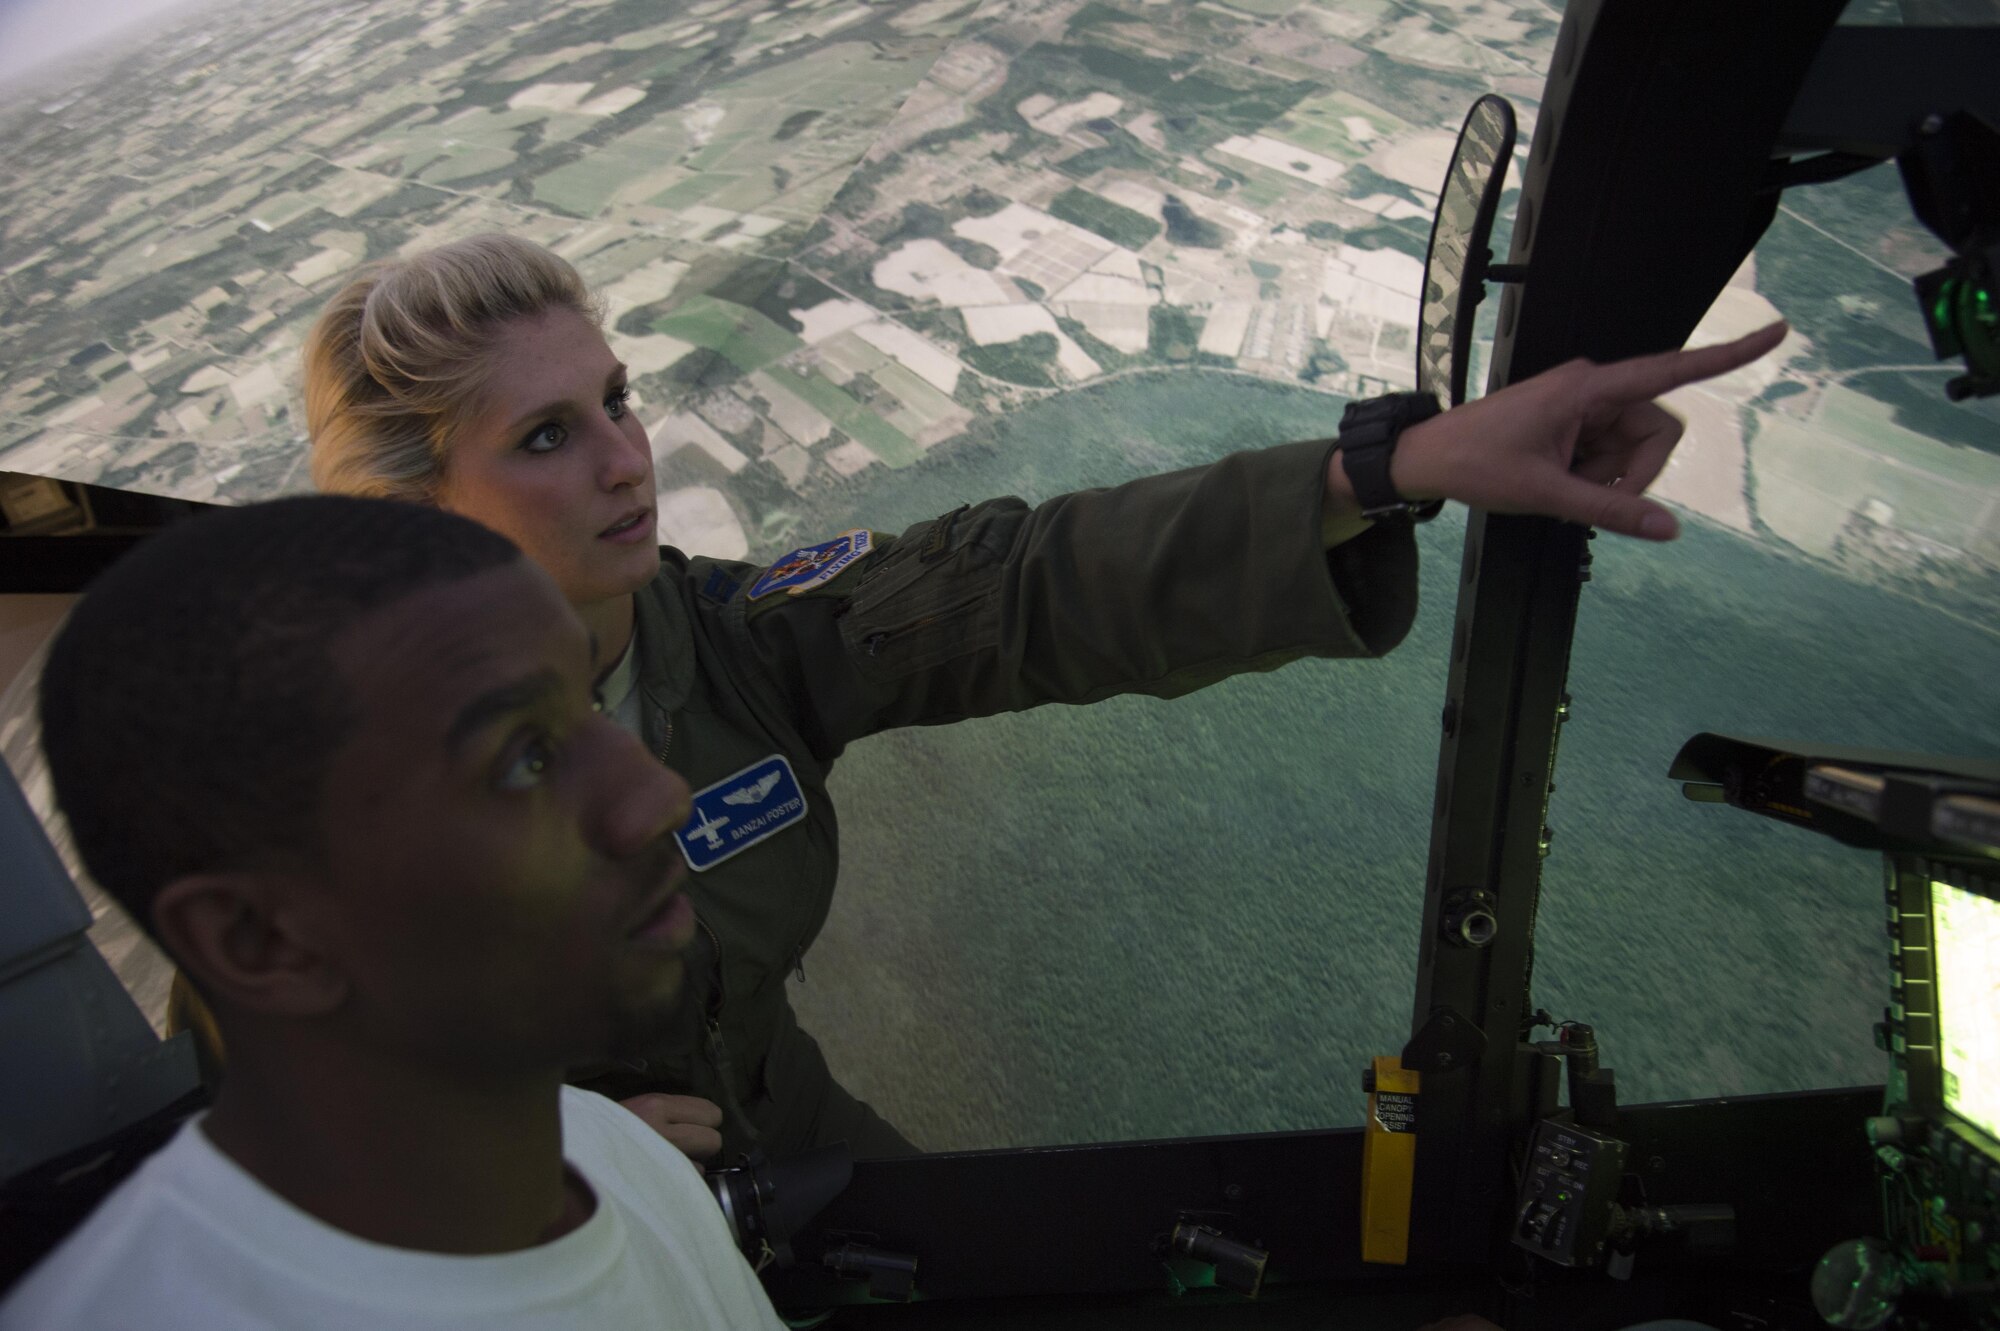 Capt. Kayla Foster, 74th Fighter Squadron A-10C Thunderbolt II pilot, gives instruction to Malcolm Mitchell, New England Patriots’ wide receiver and Super Bowl LI Champion, on operating the A-10 simulator during a visit March 7, 2017, at Moody Air Force Base, Ga. Mitchell, a Valdosta native, got a glimpse of a typical day in the life of Moody Airmen. Mitchell also spent time with Airmen and signed autographs for local Patriots’ fans during his visit. (U.S. Air Force photo by Andrea Jenkins)